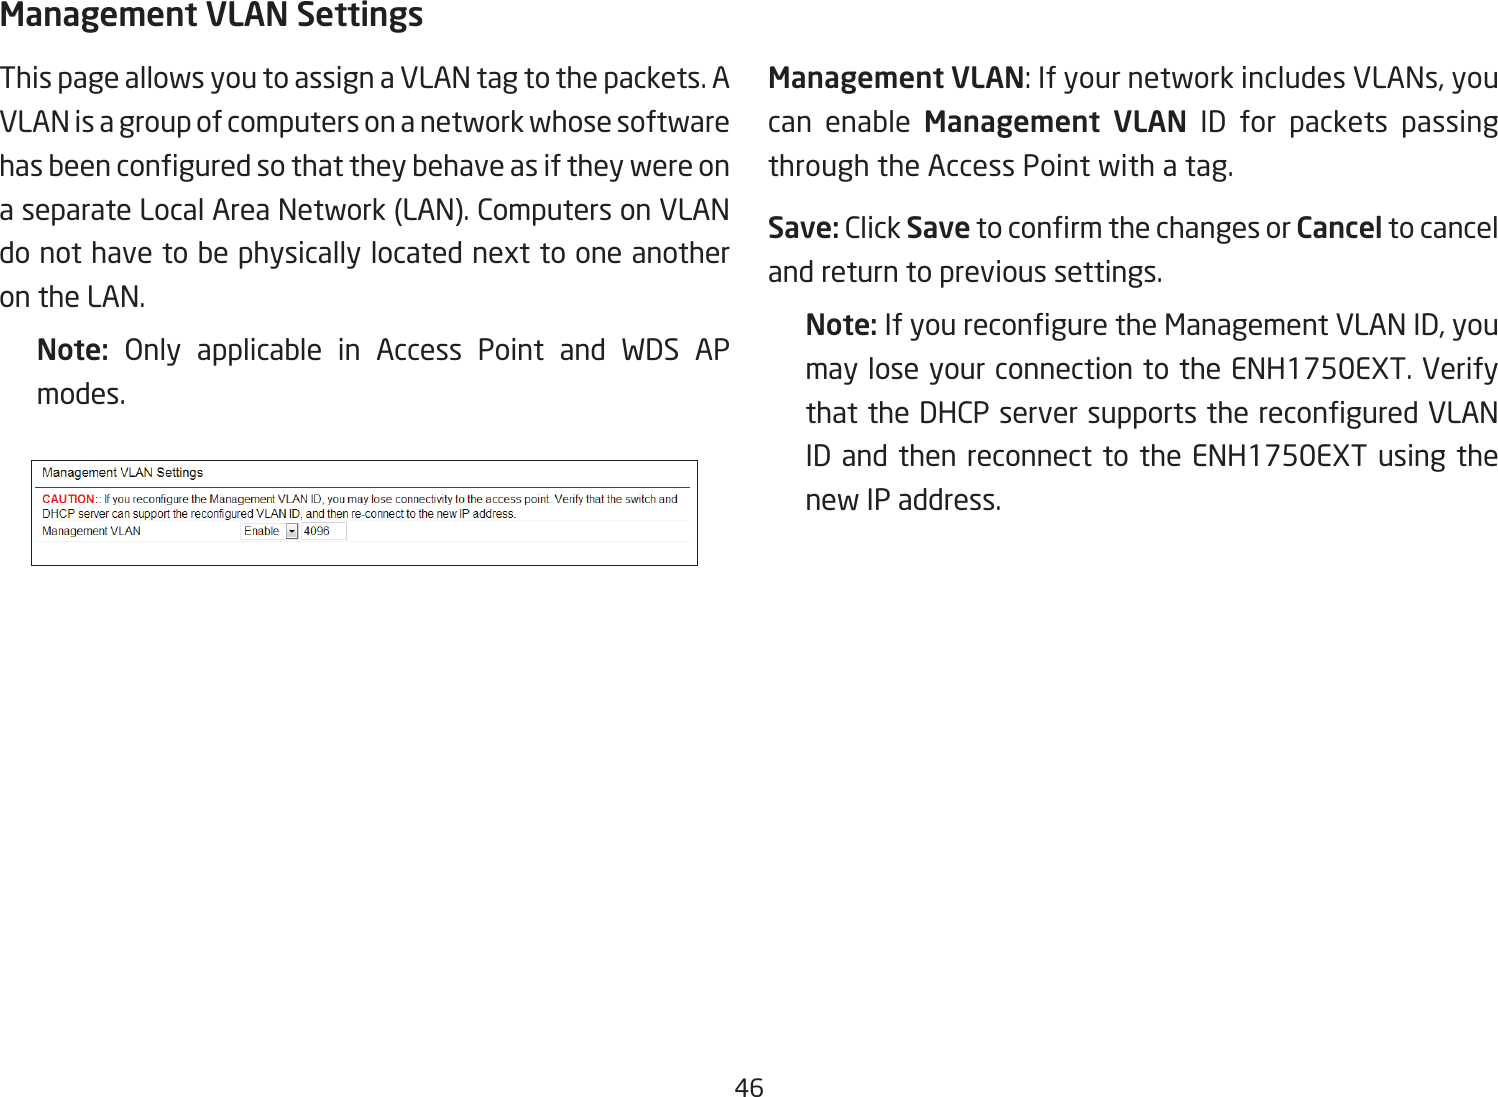 46Management VLAN SettingsThis page allows you to assign a VLAN tag to the packets. A VLAN is a group of computers on a network whose software hasbeenconguredsothattheybehaveasiftheywereona separate Local Area Network (LAN). Computers on VLAN do not have to be physically located next to one another on the LAN.Note:  Only applicable in Access Point and WDS APmodes.     Management VLAN: If your network includes VLANs, you can enable Management  VLAN ID for packets passing through the Access Point with a tag. Save: Click SavetoconrmthechangesorCancel to cancel and return to previous settings.Note: IfyoureconguretheManagementVLANID,youmay lose your connection to the ENH1750EXT. Verify thattheDHCPserversupportsthereconguredVLANID and then reconnect to the ENH1750EXT using the new IP address. 